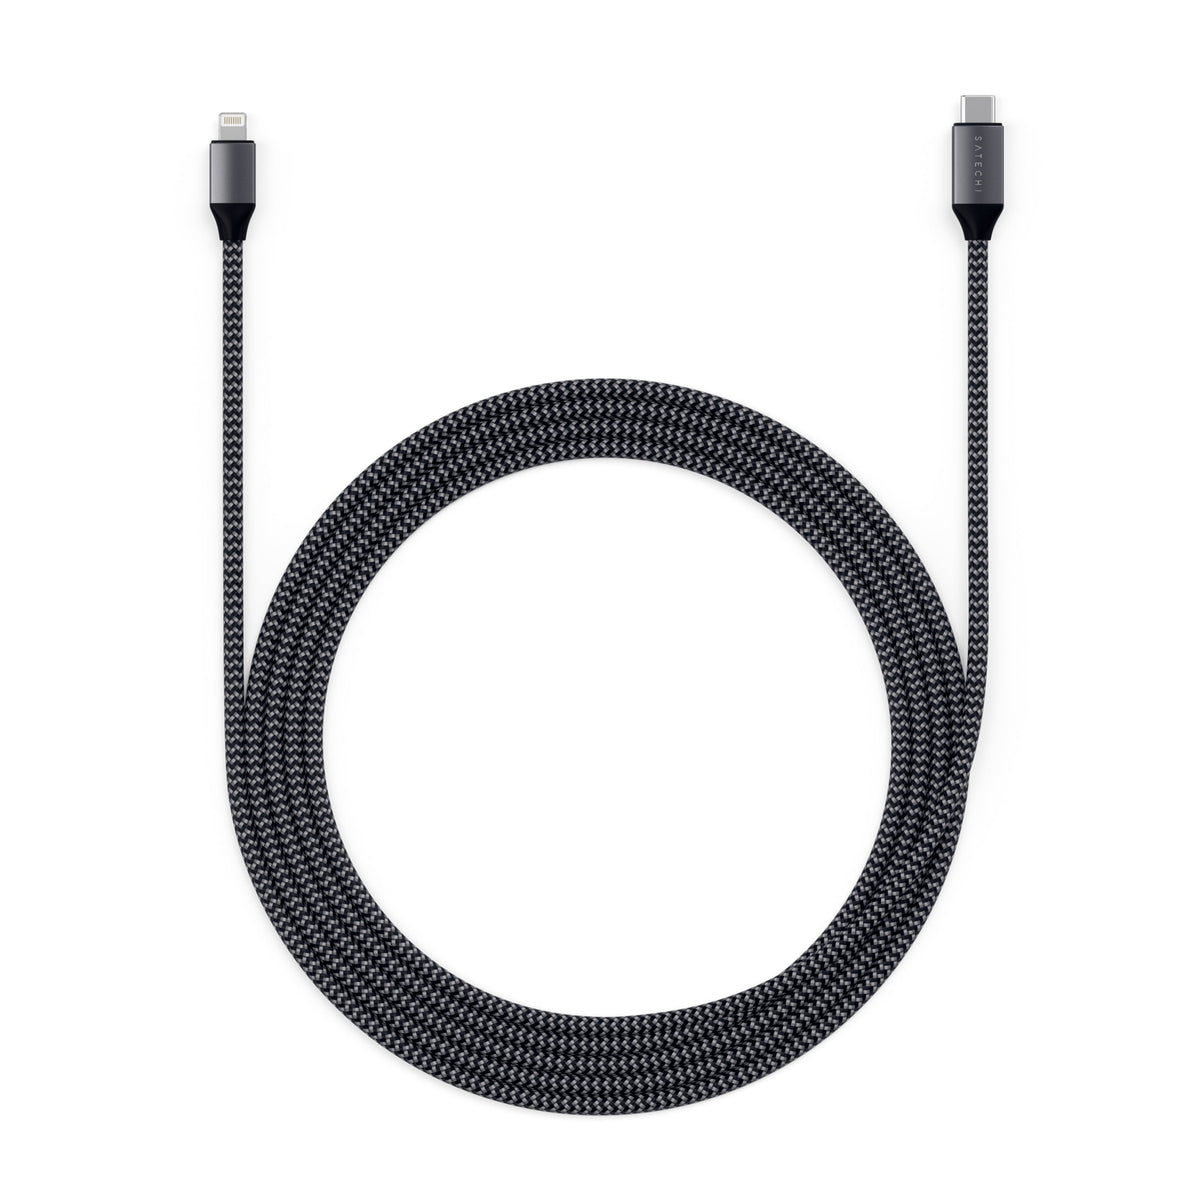 Satechi Type-C to Lightning Charging Cable 1.8 mts